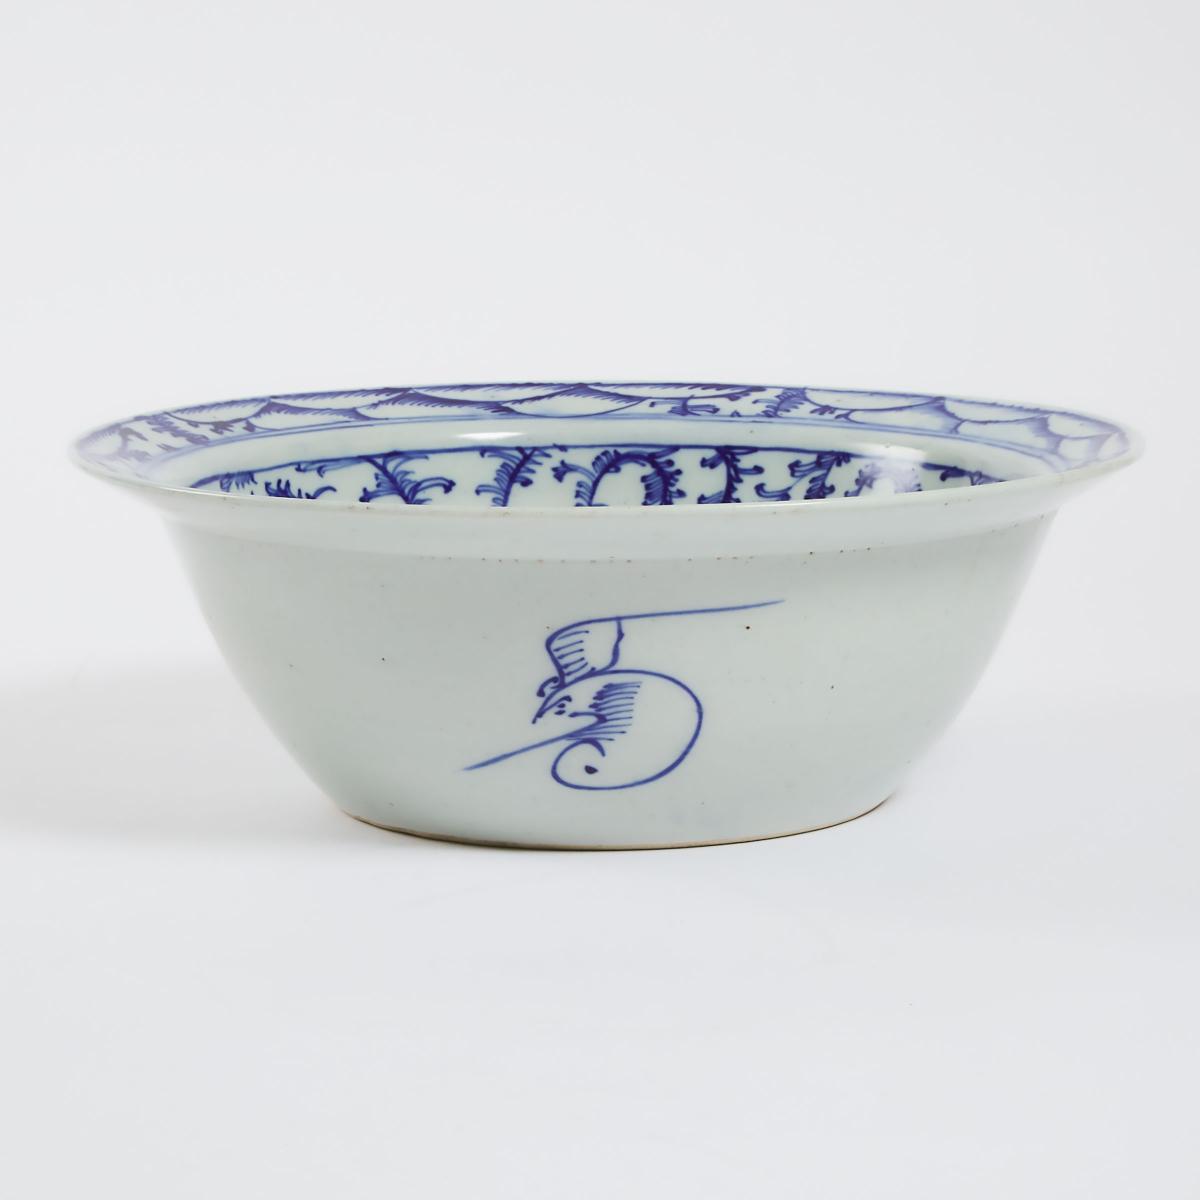 A Large Blue and White 'Lotus' Basin, 19th Century, 十九世纪 青花莲纹大盆, diameter 14.6 in — 37.2 cm - Image 2 of 4